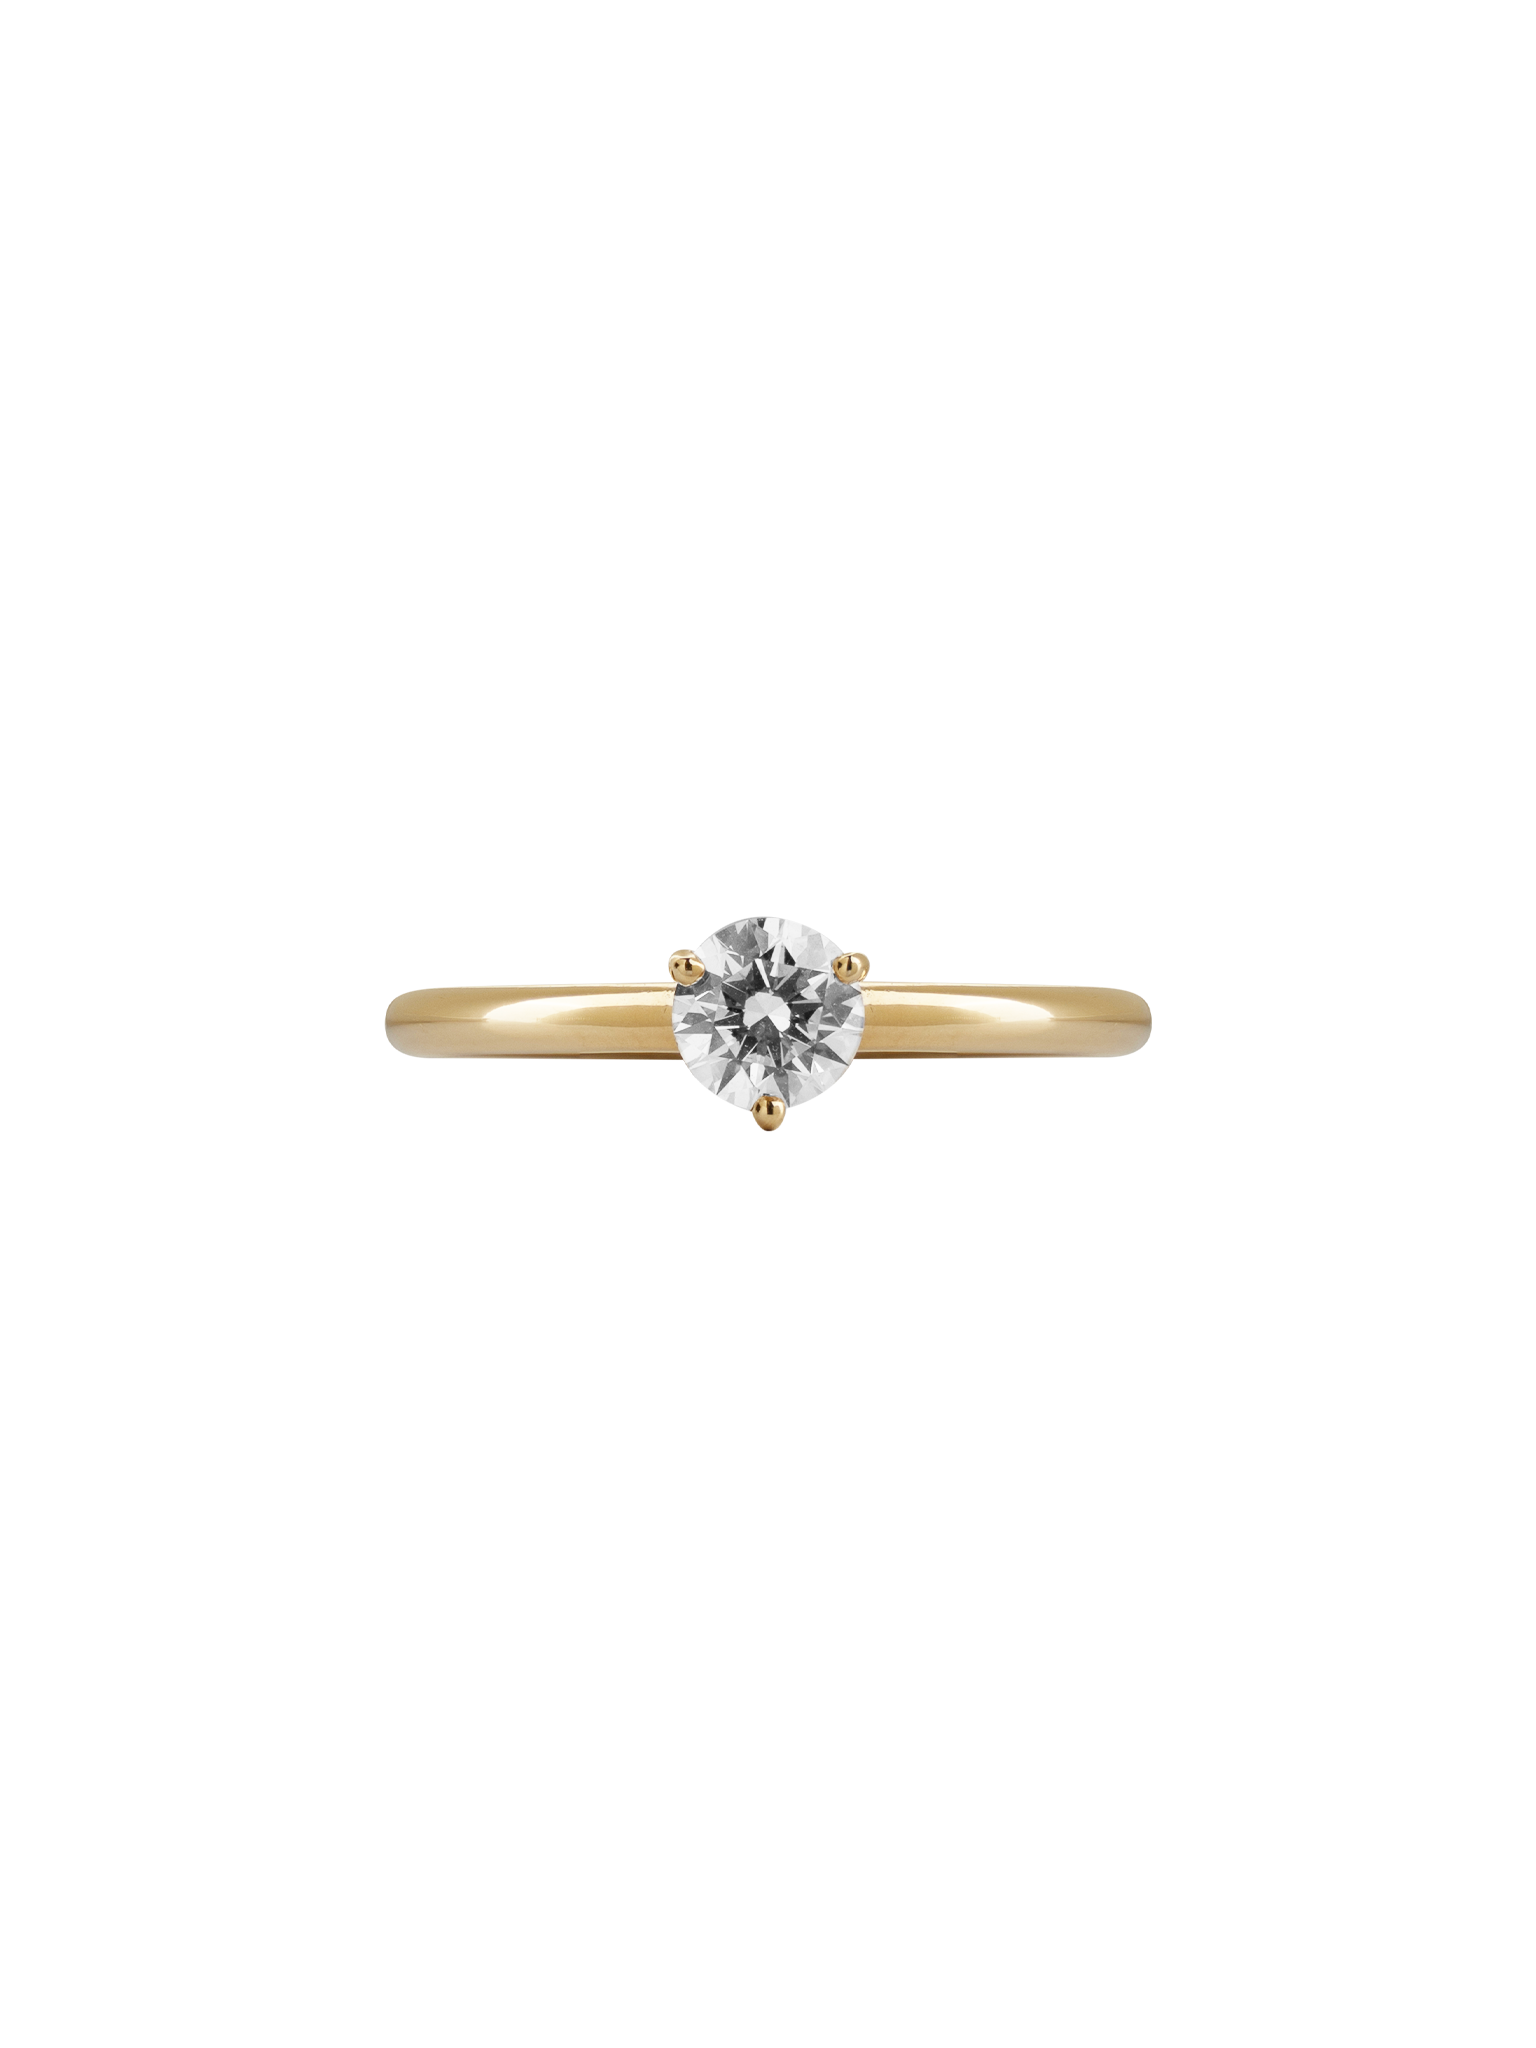 Solitaire absolu.e 0.5ct - 18k yellow gold